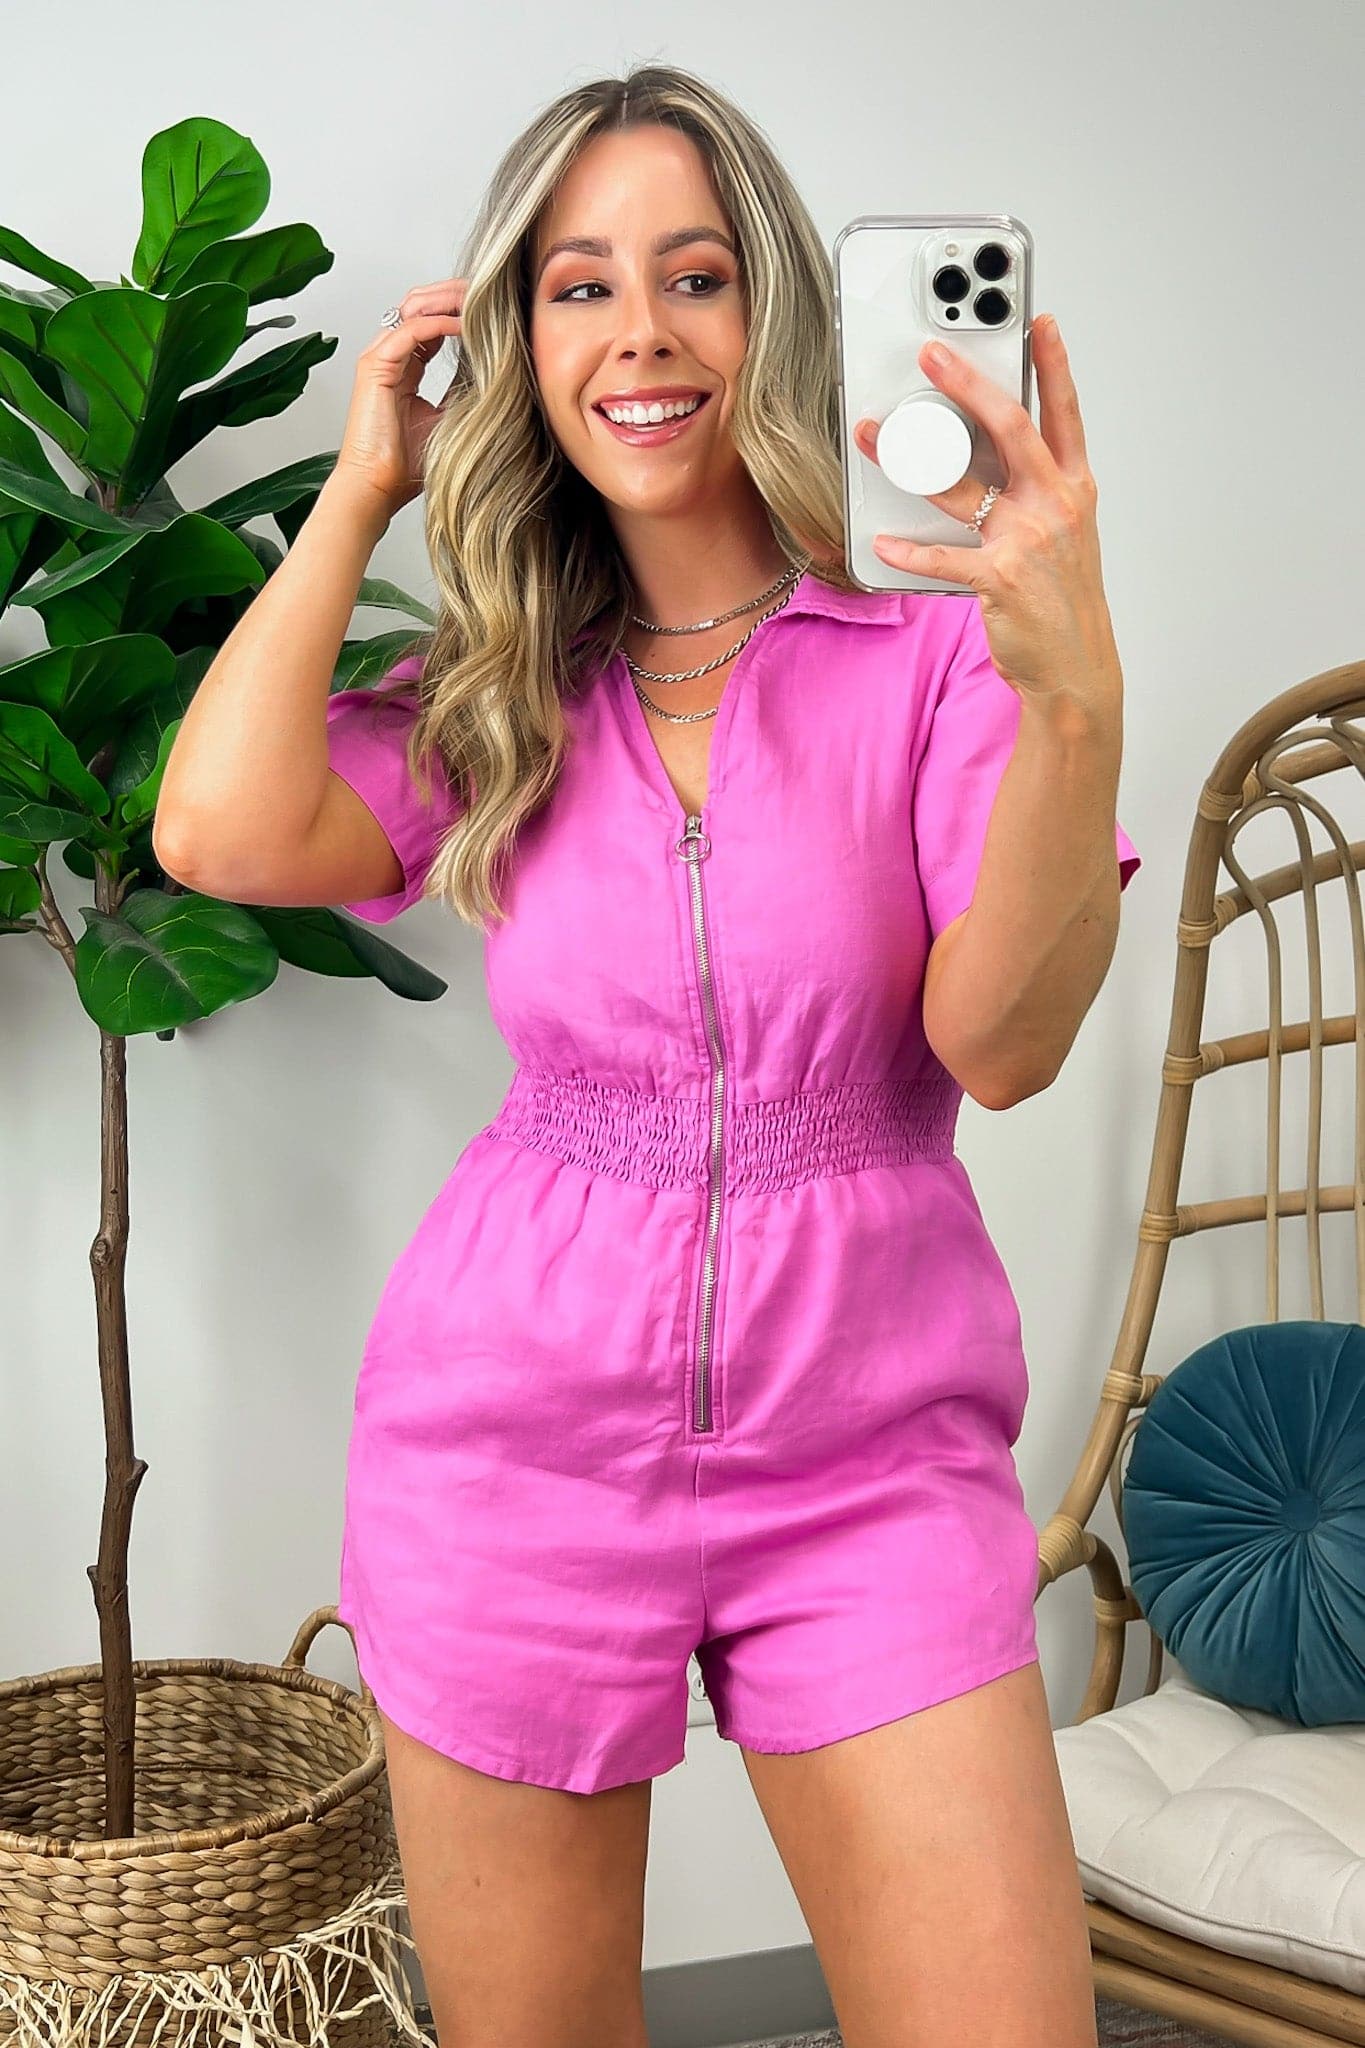  Coda Short Sleeve Zip Up Romper - FINAL SALE - Madison and Mallory